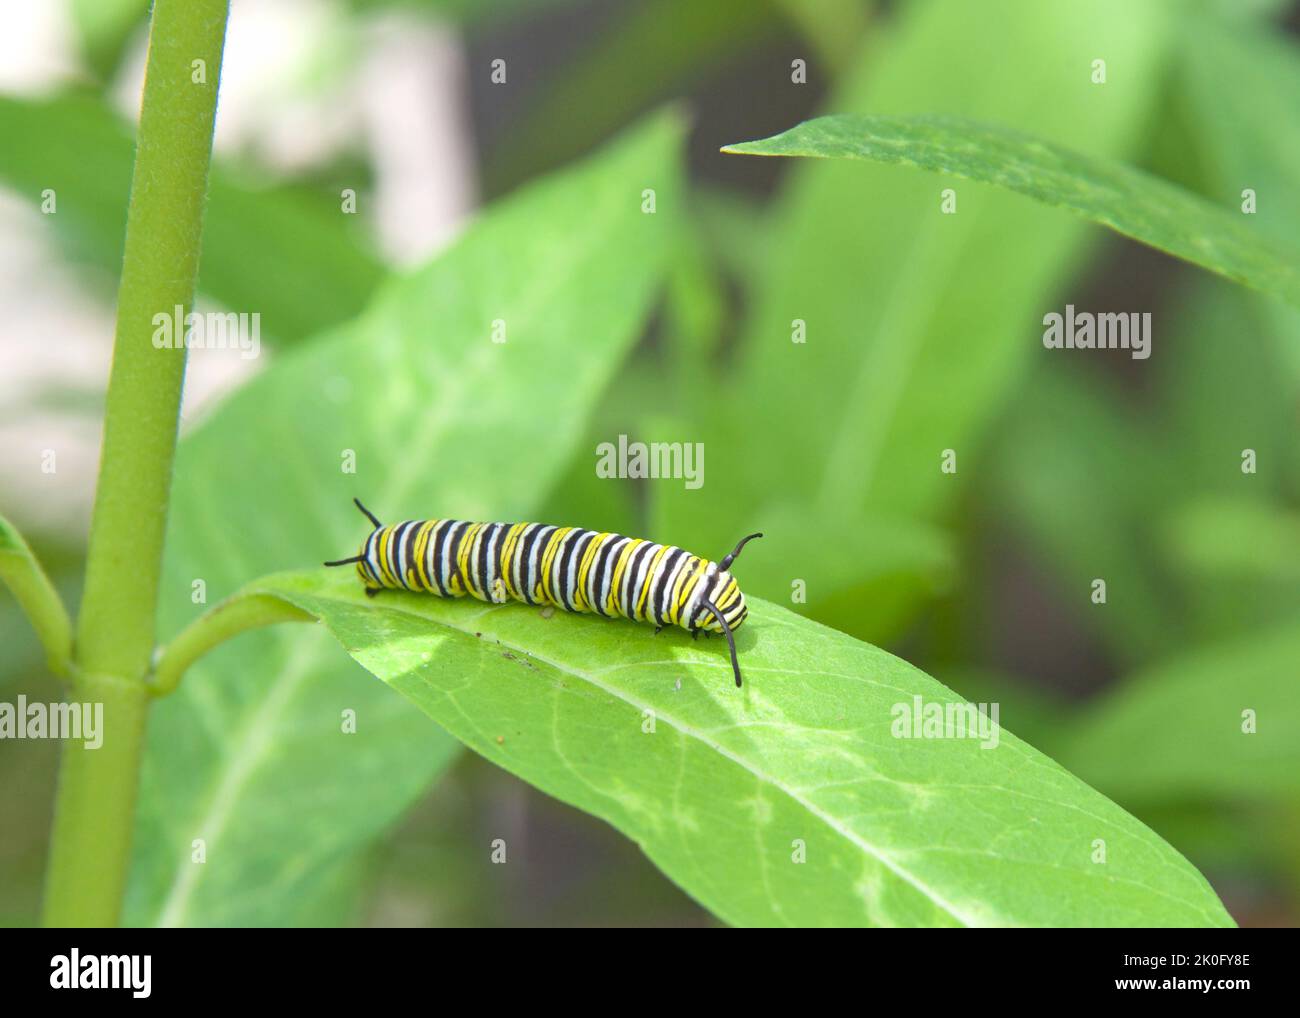 Second instar monarch butterfly caterpillar on green milkweed leafm many green leaves in background. Stock Photo